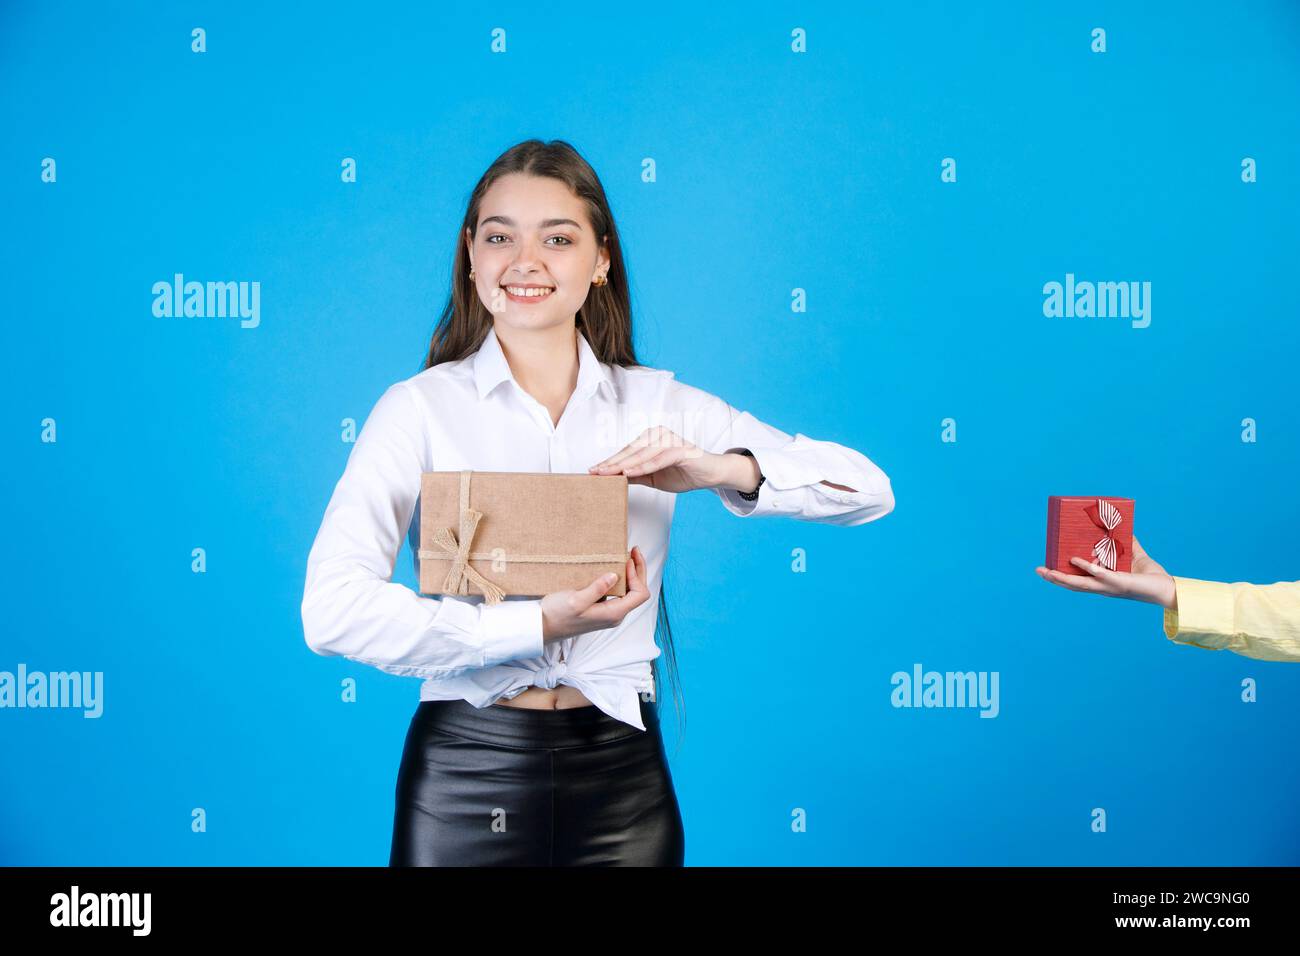 Cheerful lady holding gift box, unfolding it, while looking at camera, with anonymous hand beside. Stock Photo